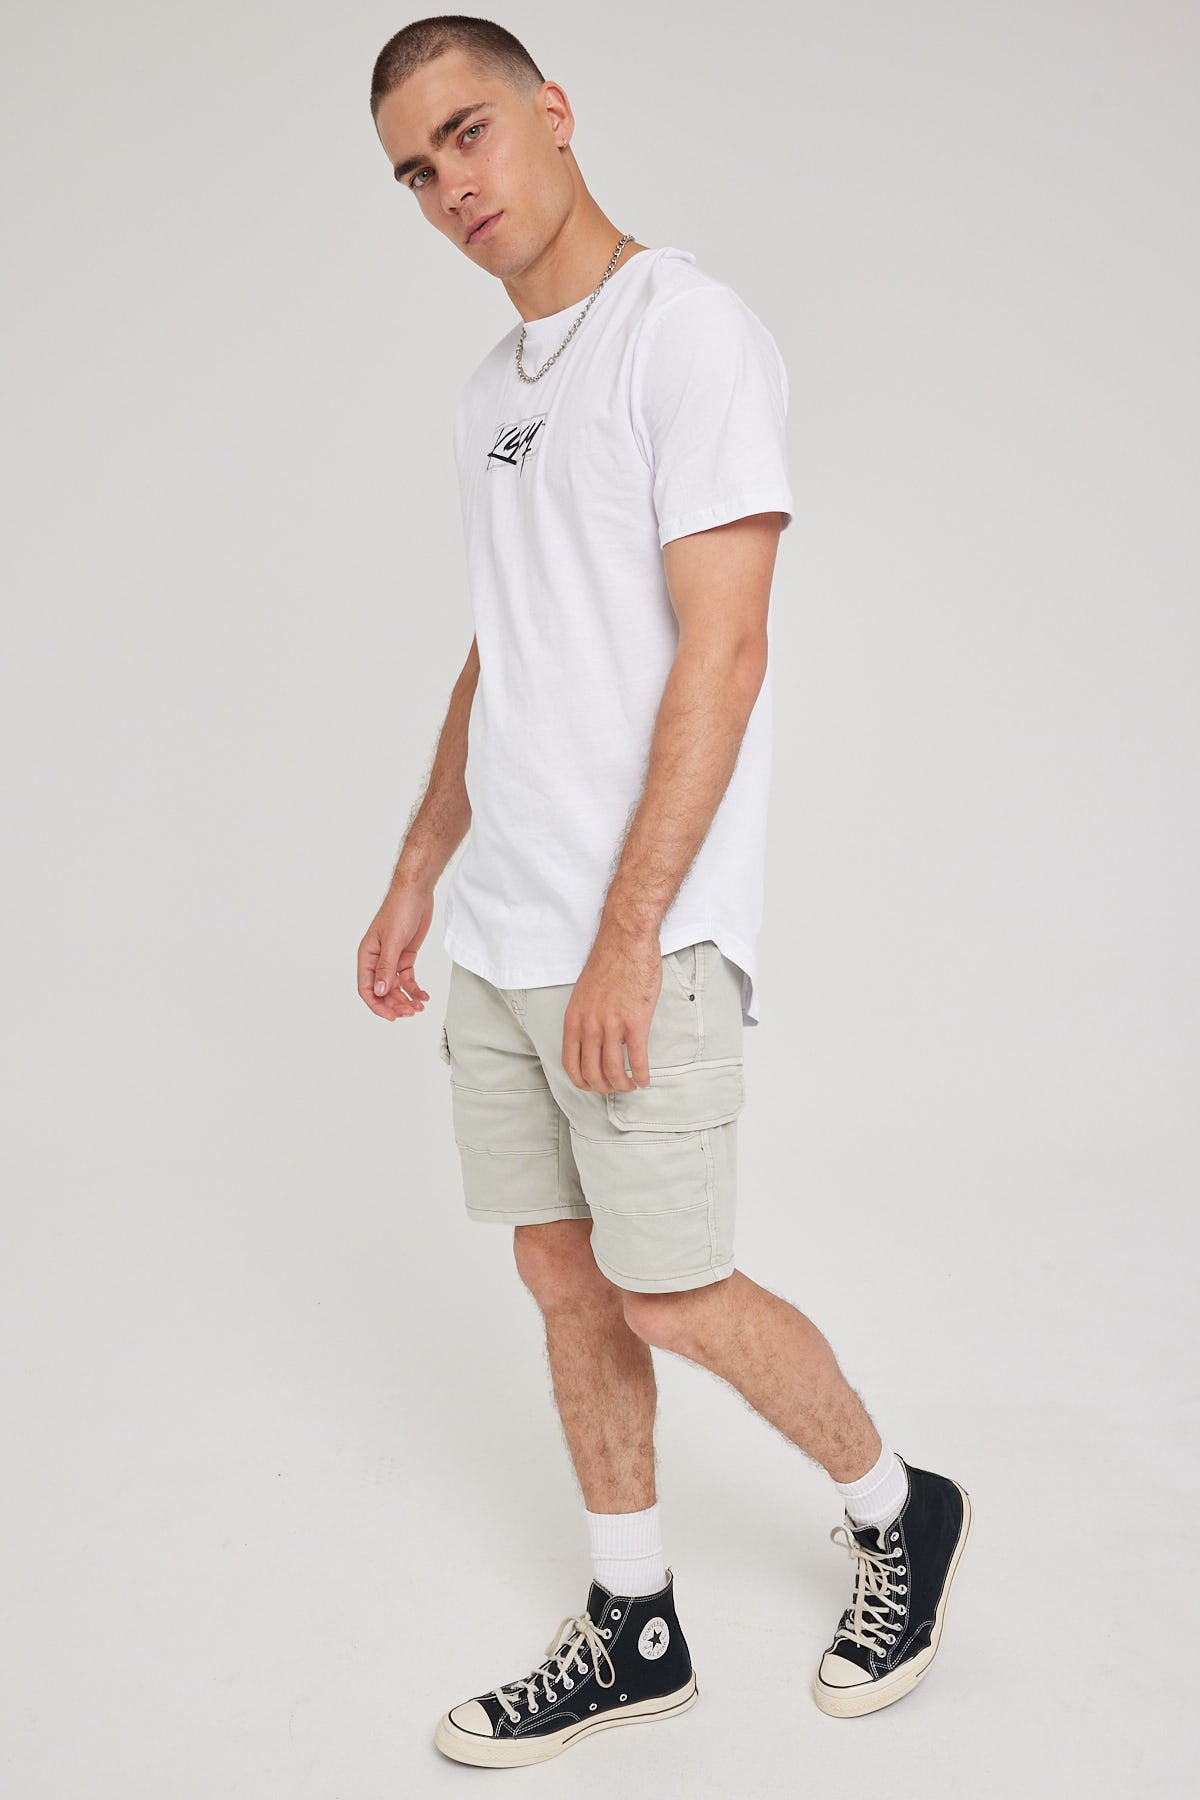 Kiss Chacey Michigan Cargo Shorts Willow Grey